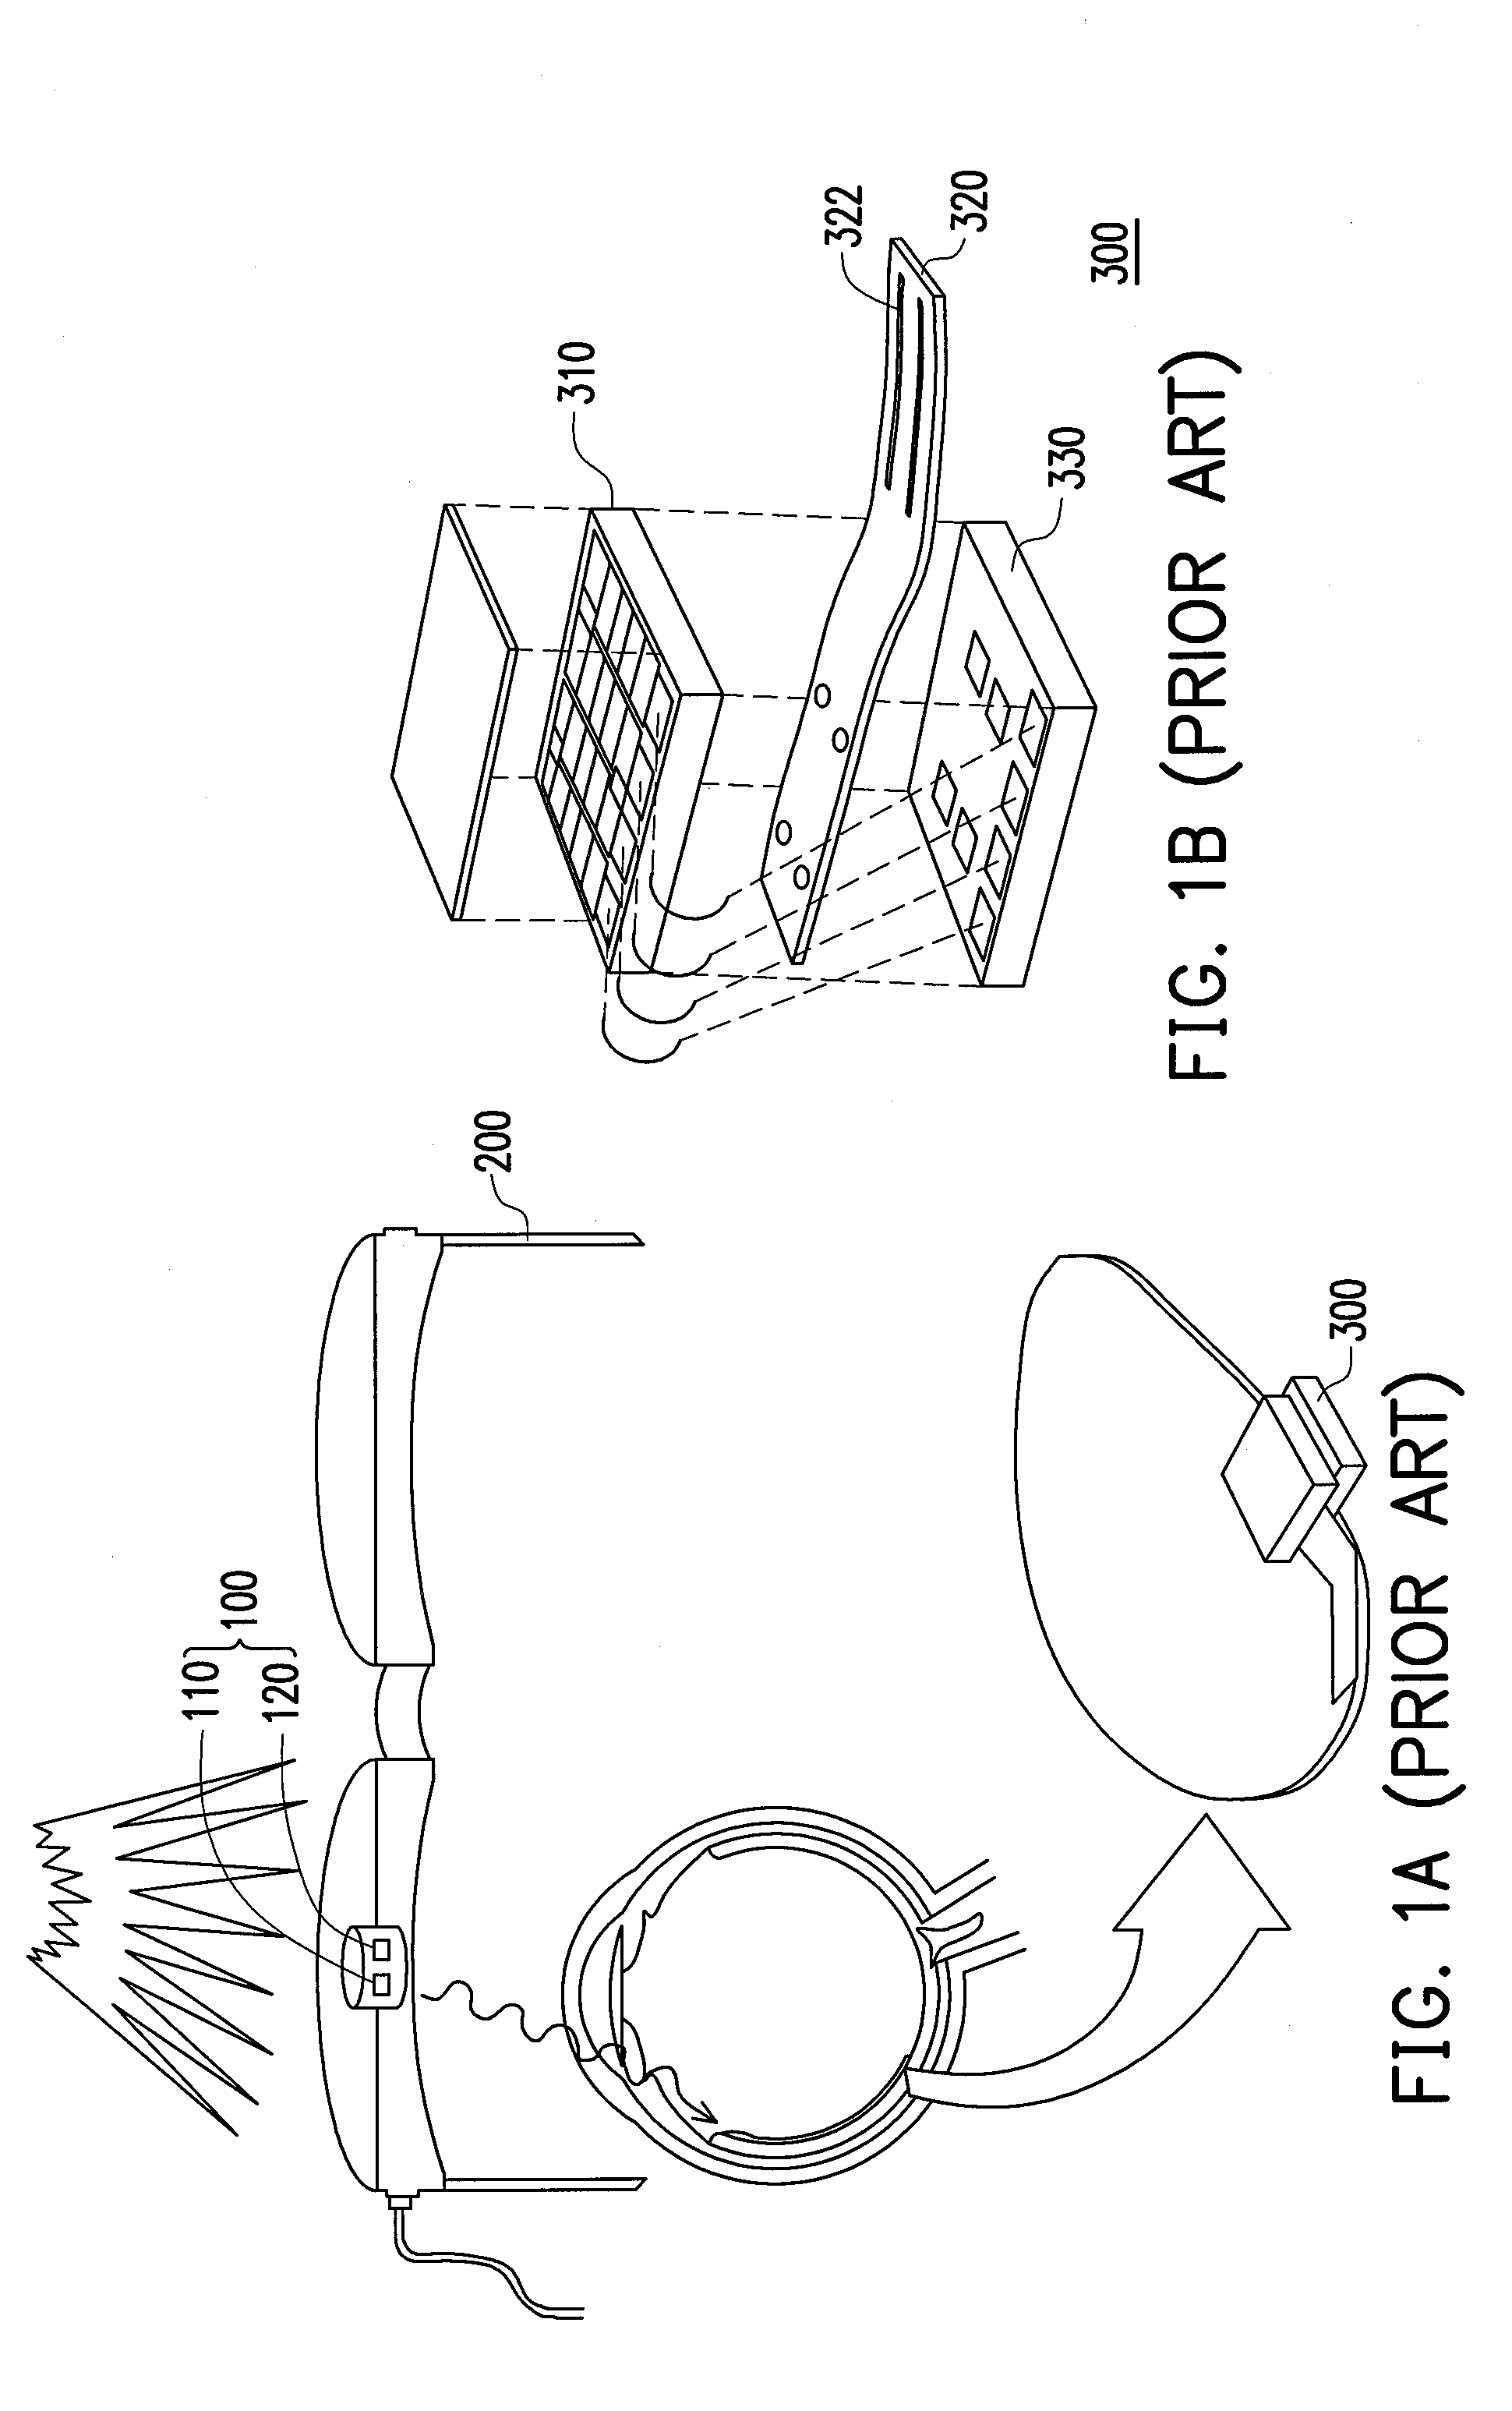 Artificial optic nerve network module, artificial retina chip module, and method for fabricating the same